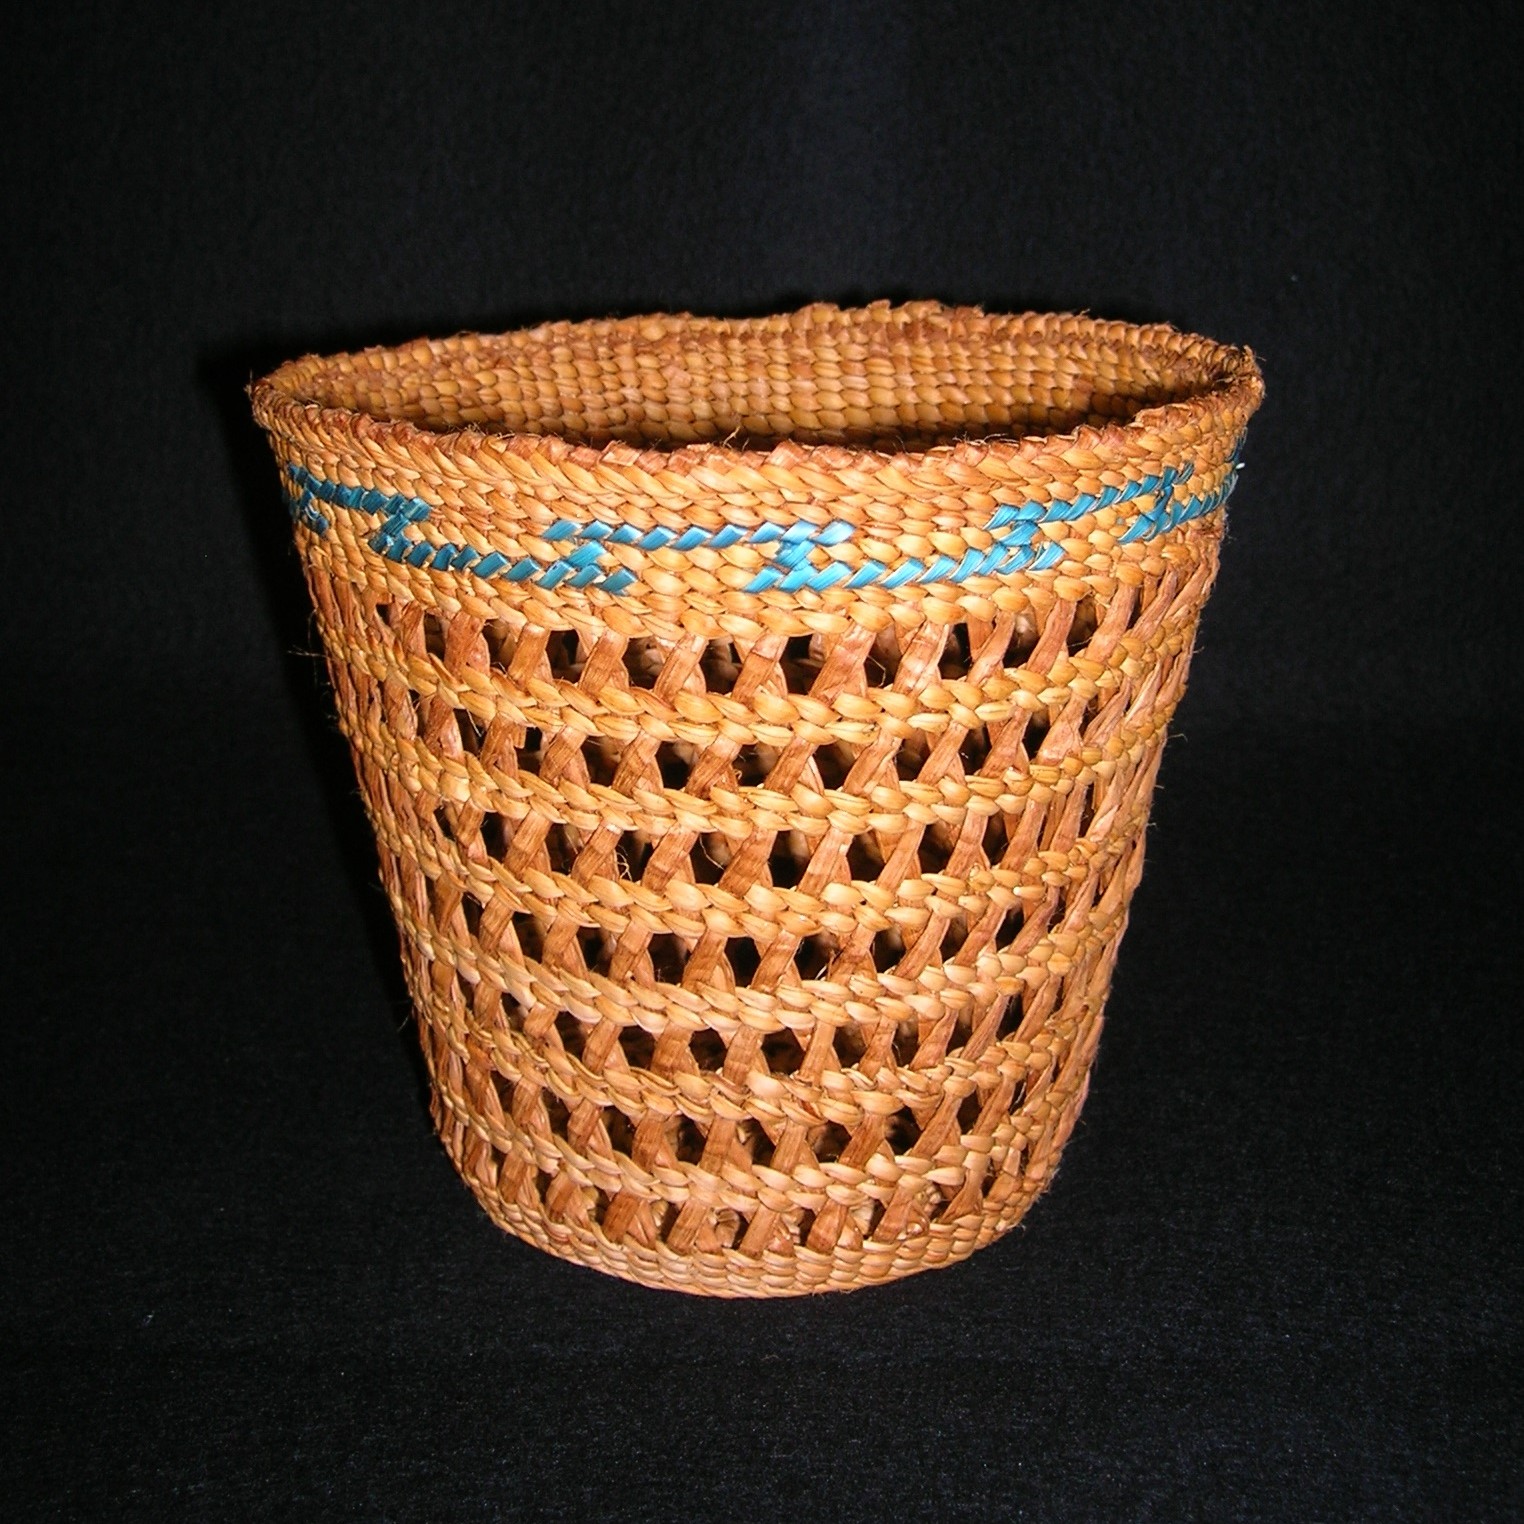 Basketry: Miniature Women’s Work Basket, with Holly Churchill